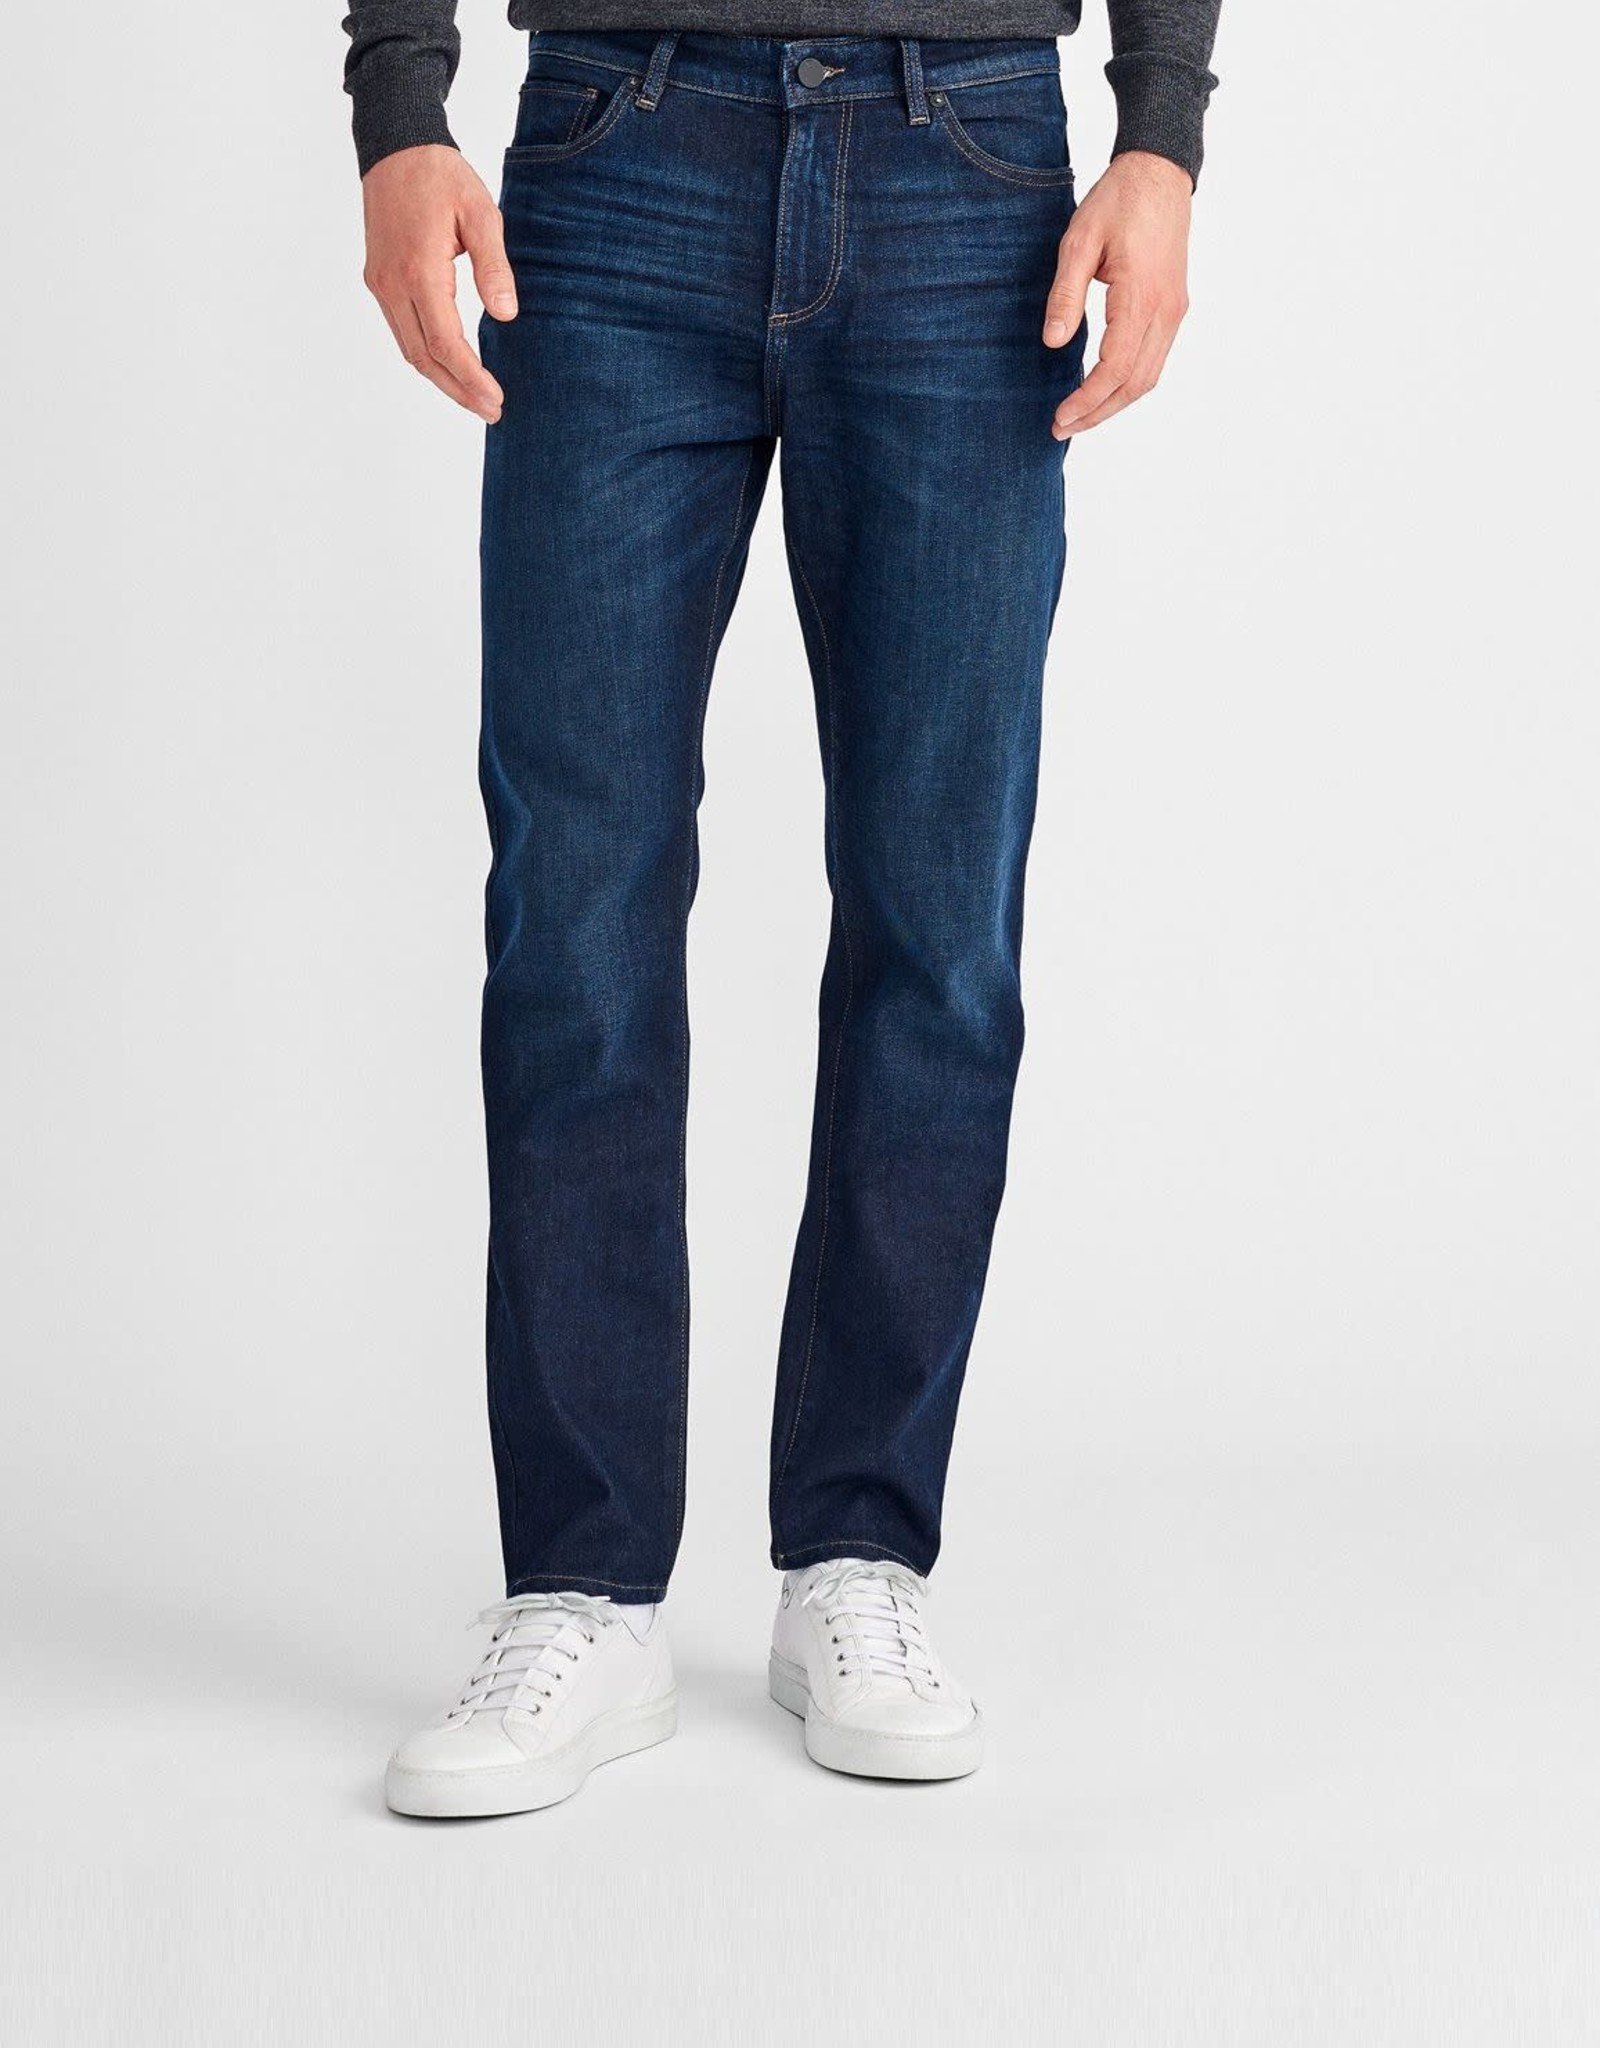 Cooper Tapered Slim Jeans DL1961 - UnTied On Woodward